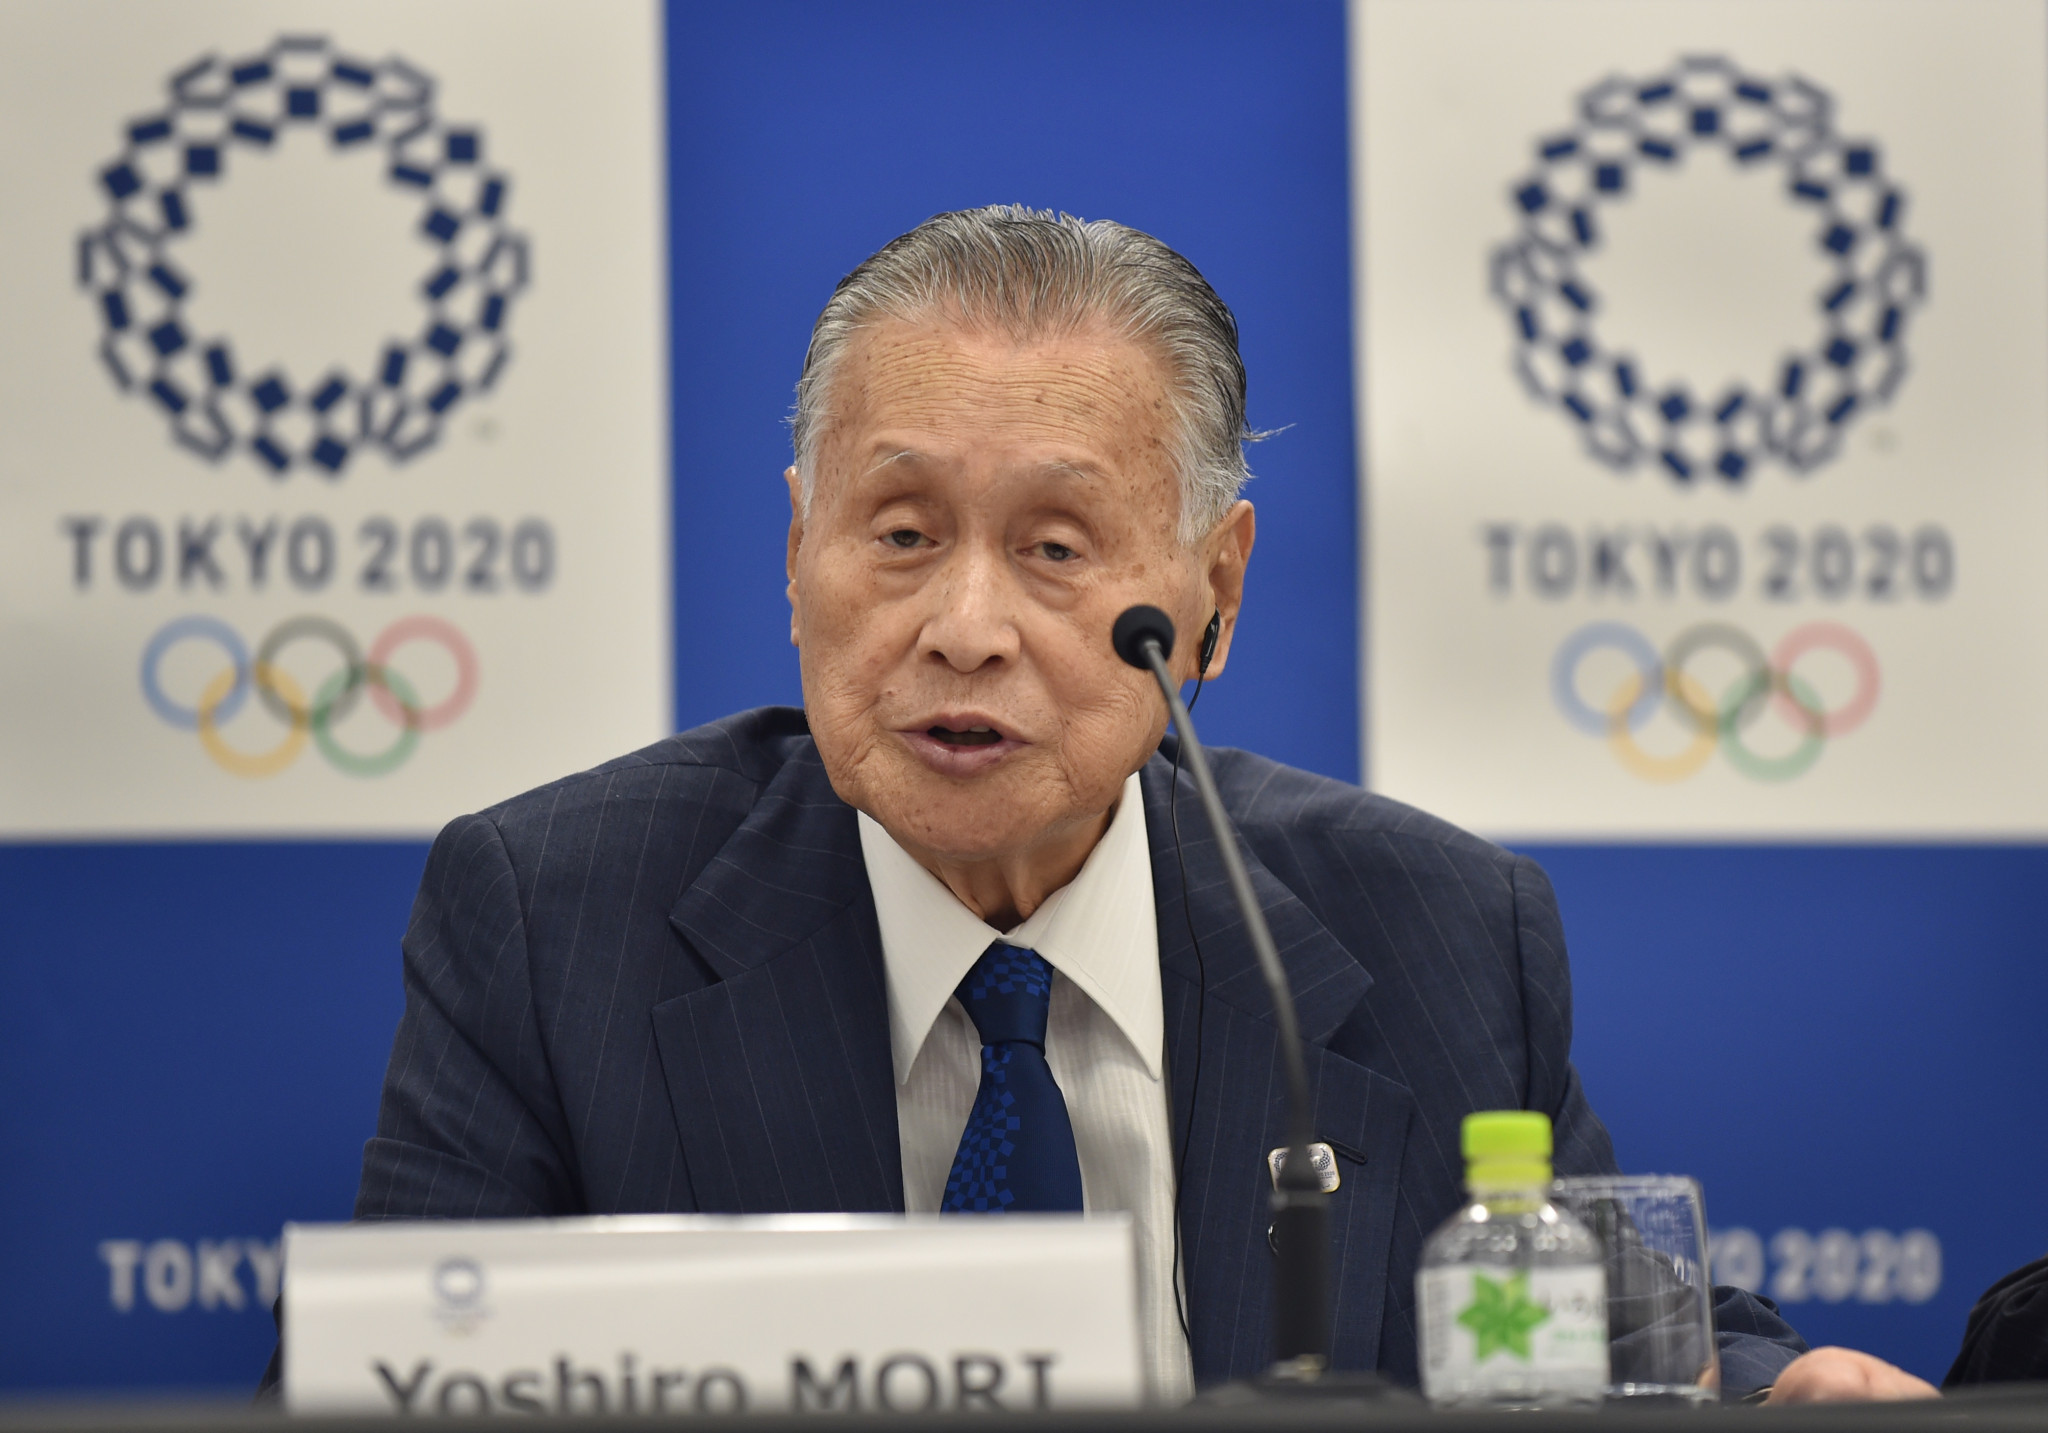  Yoshiro Mori announced his delight at the partnership ©Getty Images